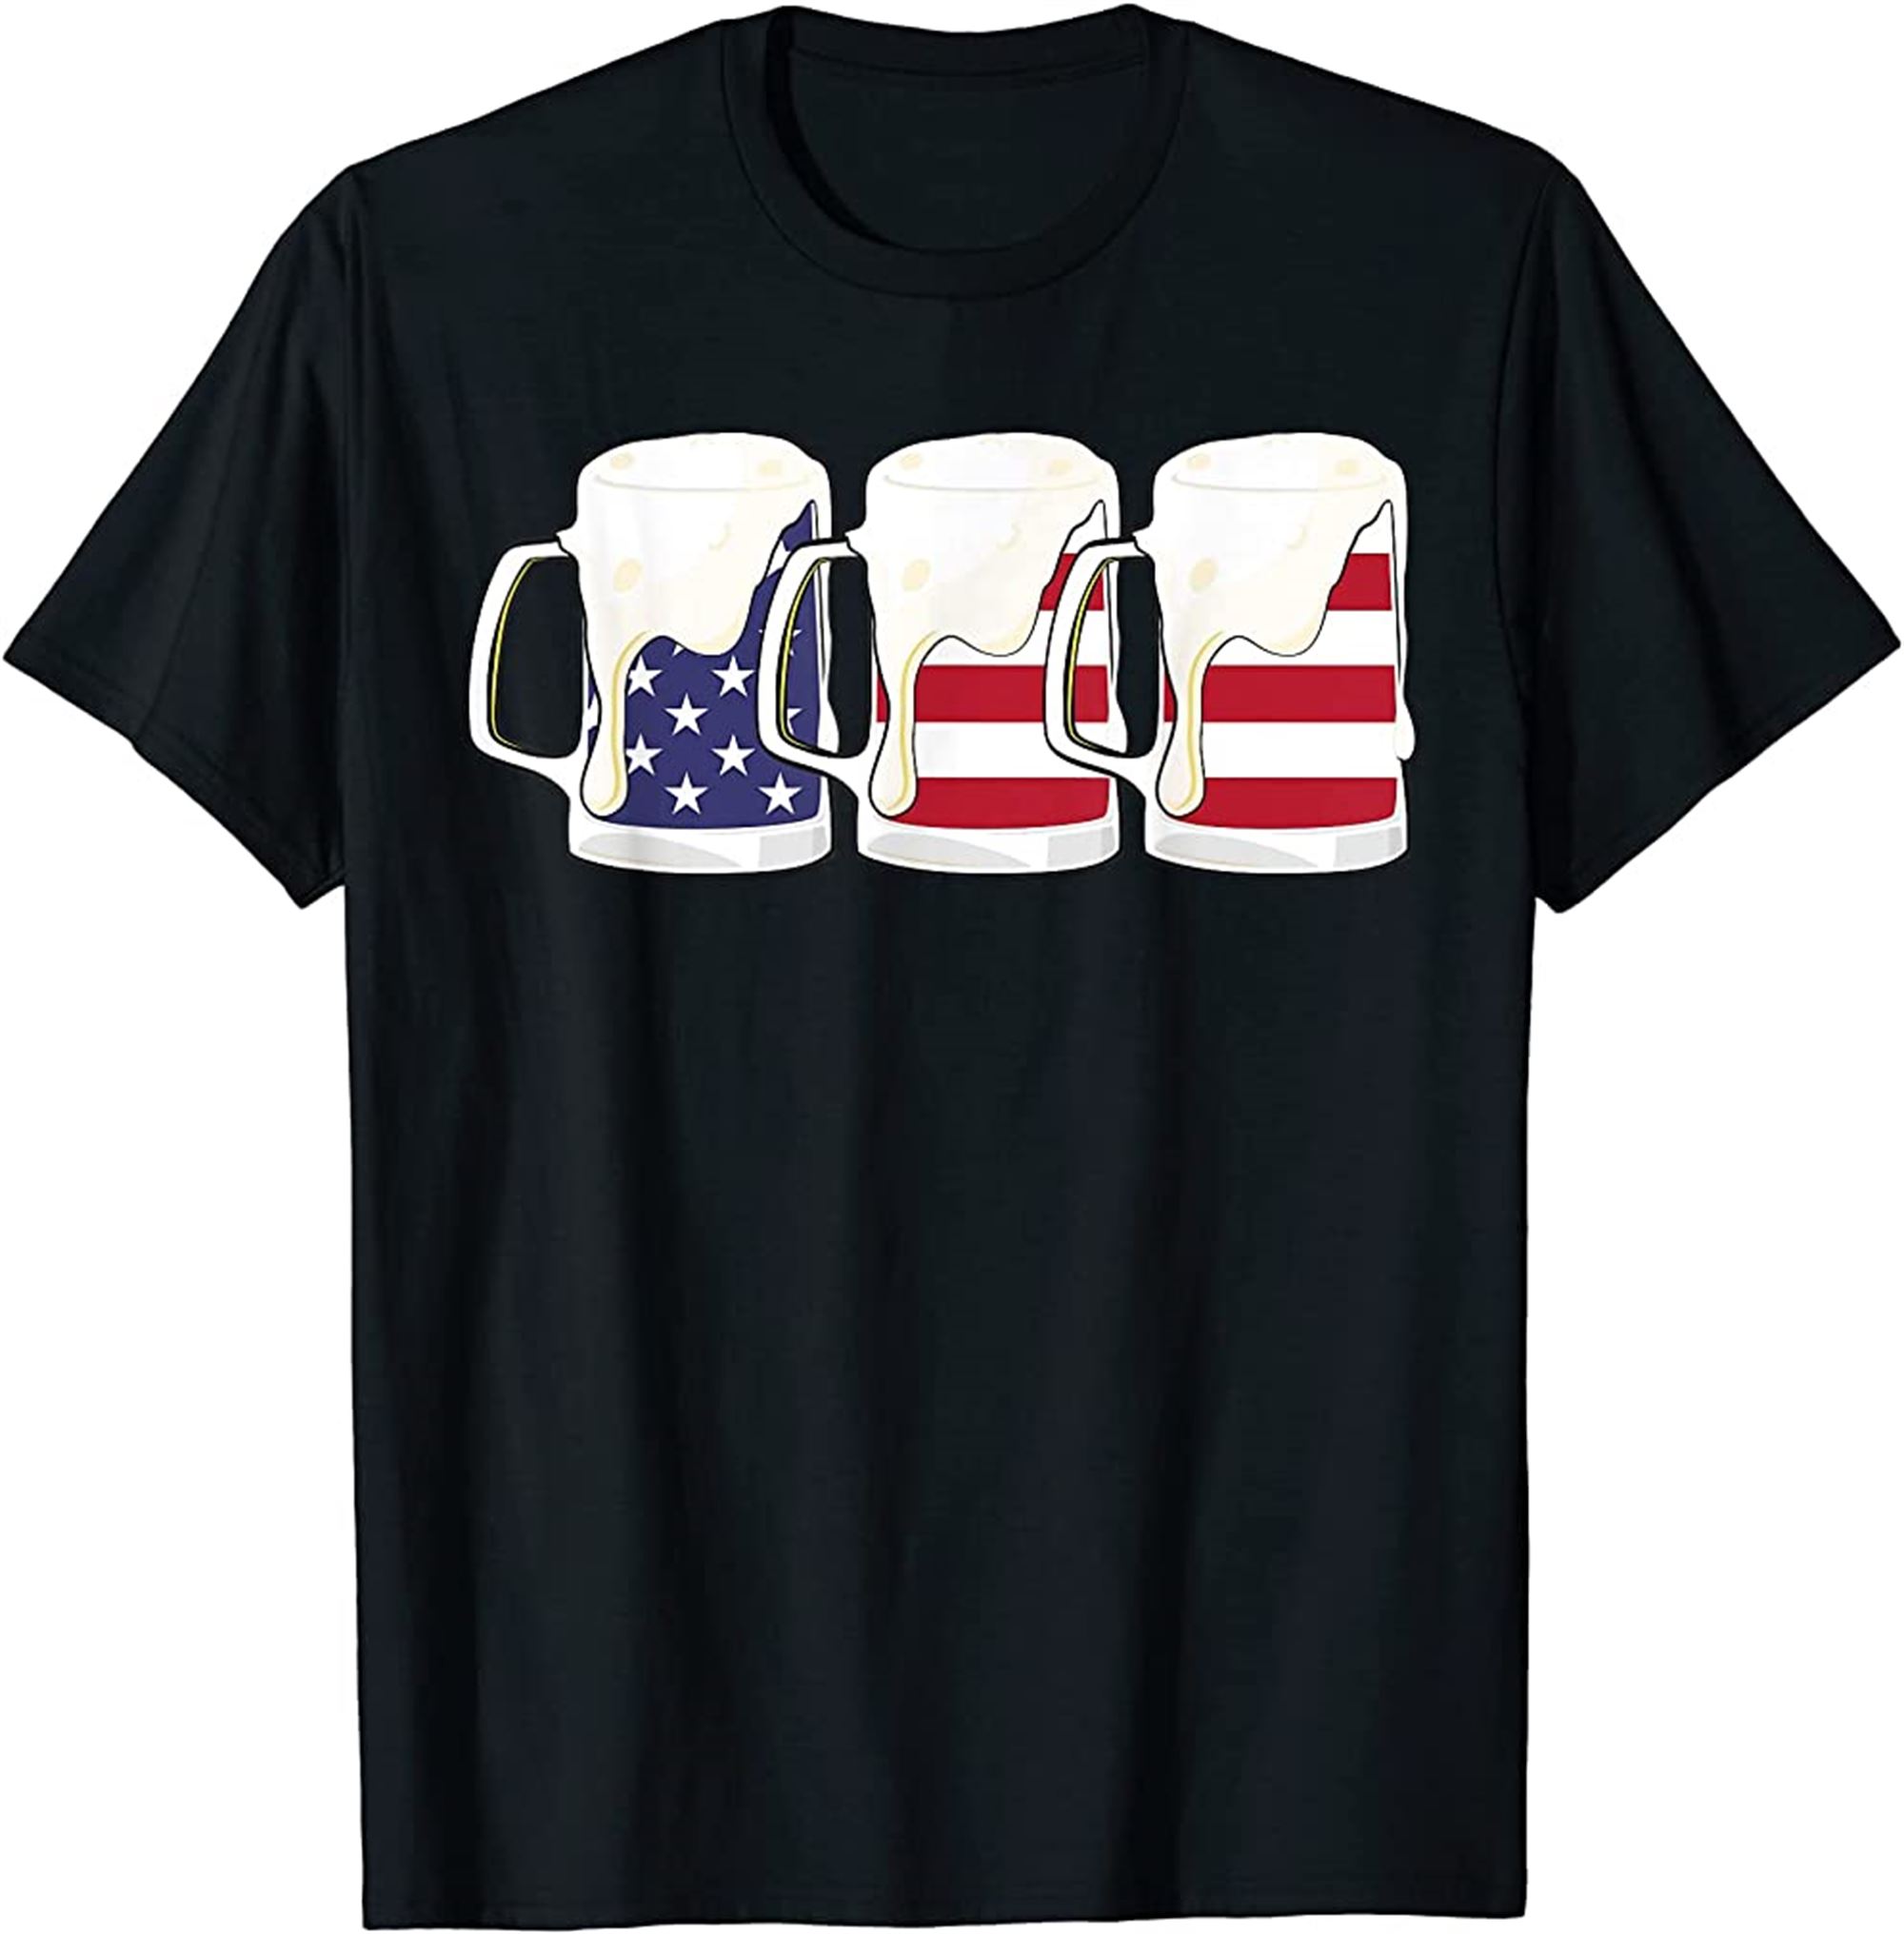 Beer American Flag T Shirt 4th Of July Men Women Merica Usa T-shirt Size Up To 5xl